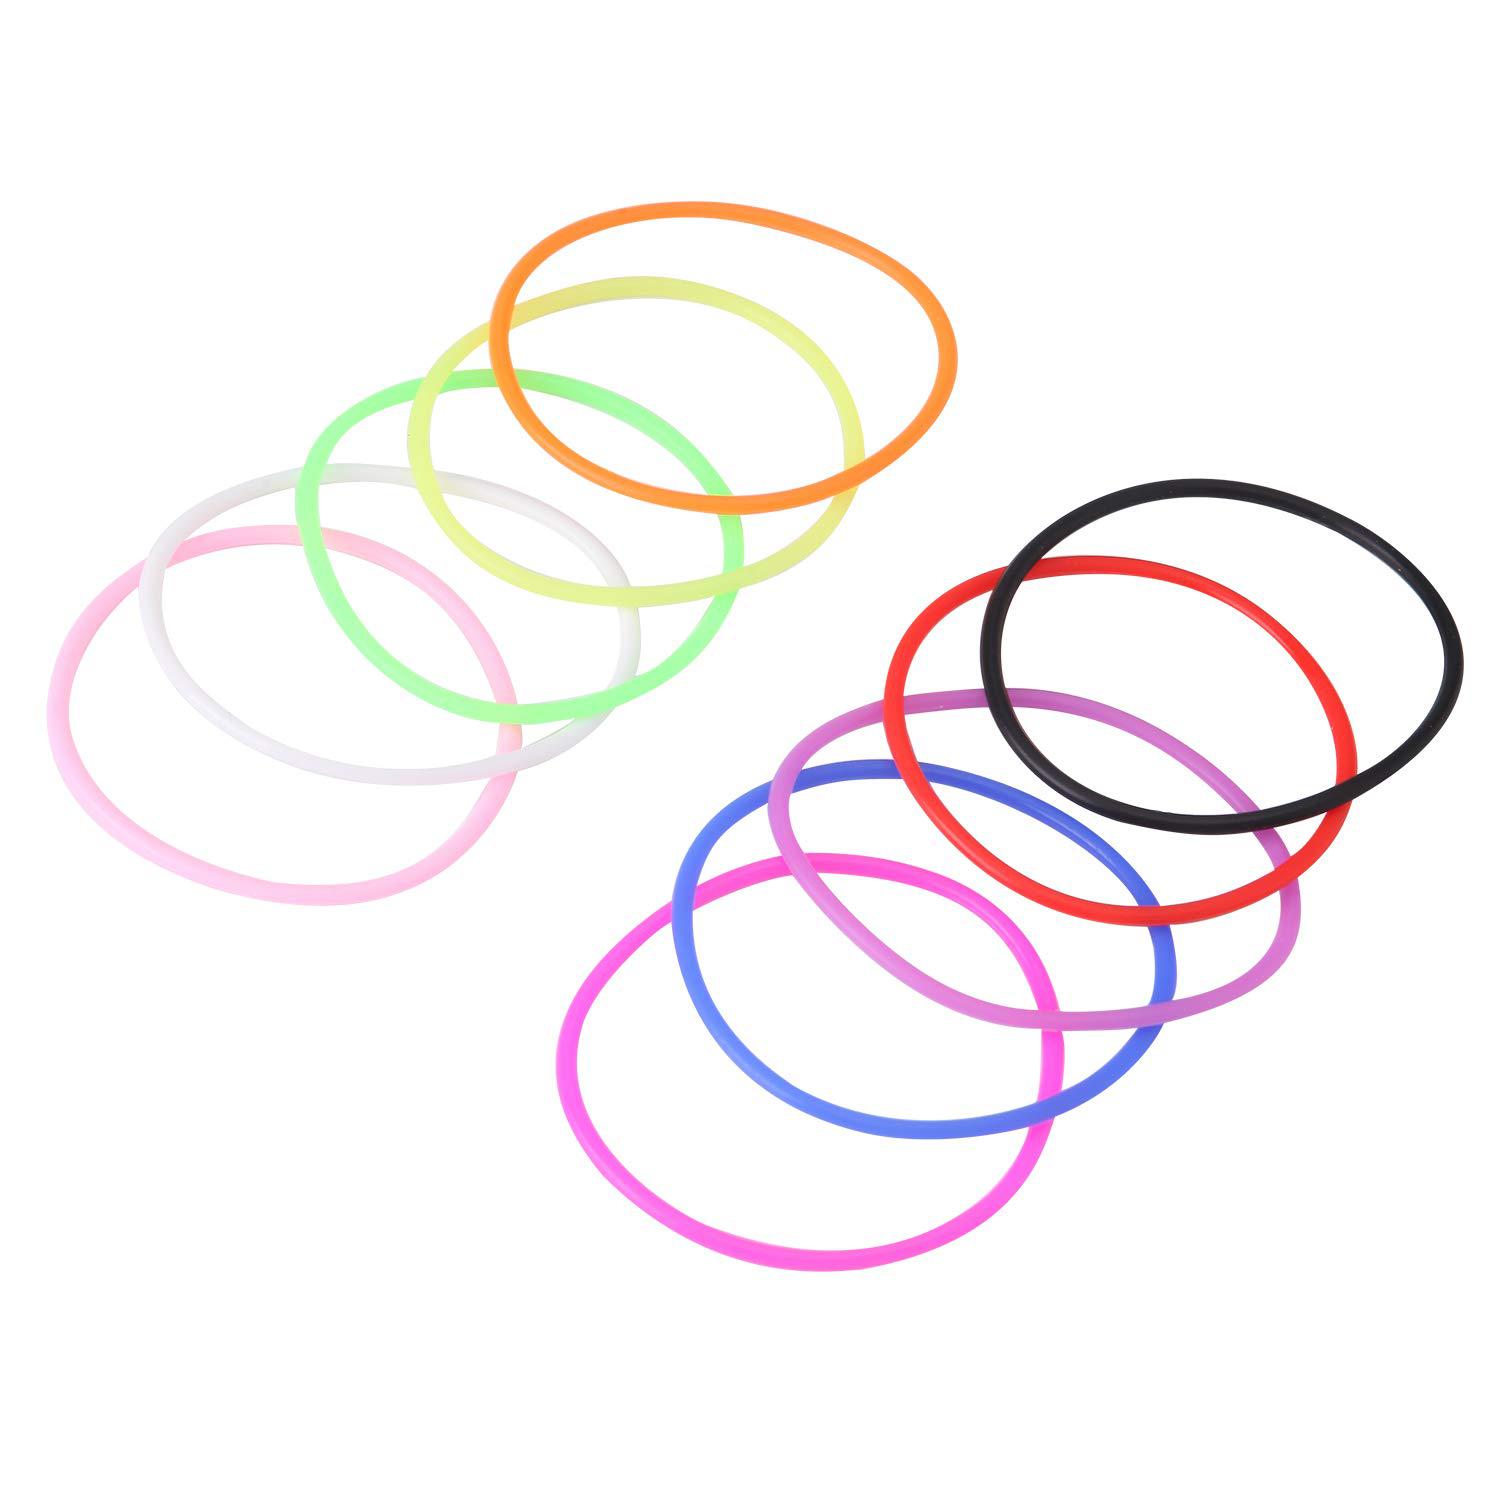 senkary 120 pieces colorful silicone jelly bracelets nonluminous 80s bracelets bands for party, adults, women, girls (10 colo